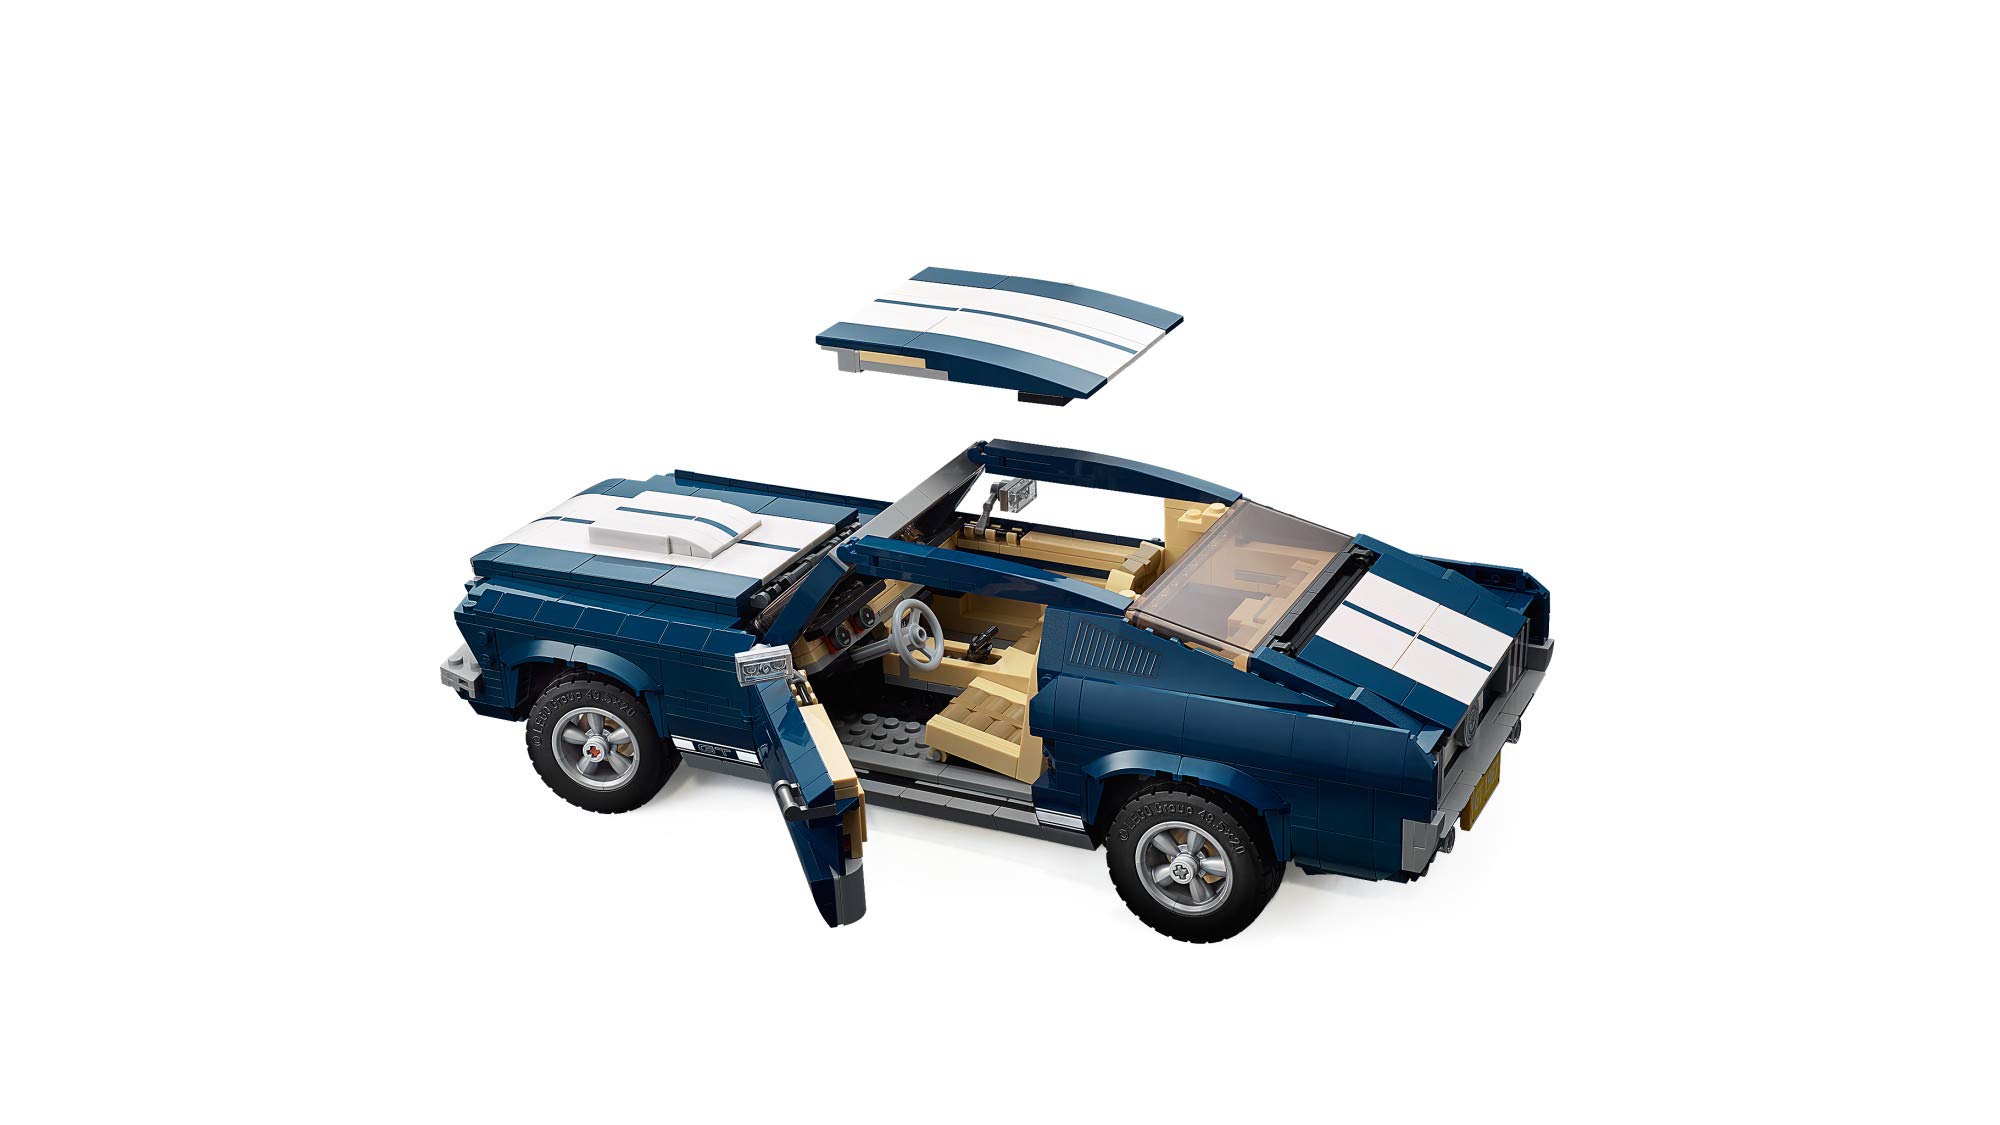 LEGO Creator Expert Ford Mustang 10265 Building Set - Exclusive Advanced Collector's Car Model, Featuring Detailed Interior, V8 Engine, Home and Office Display, Collectible for Adults and Teens